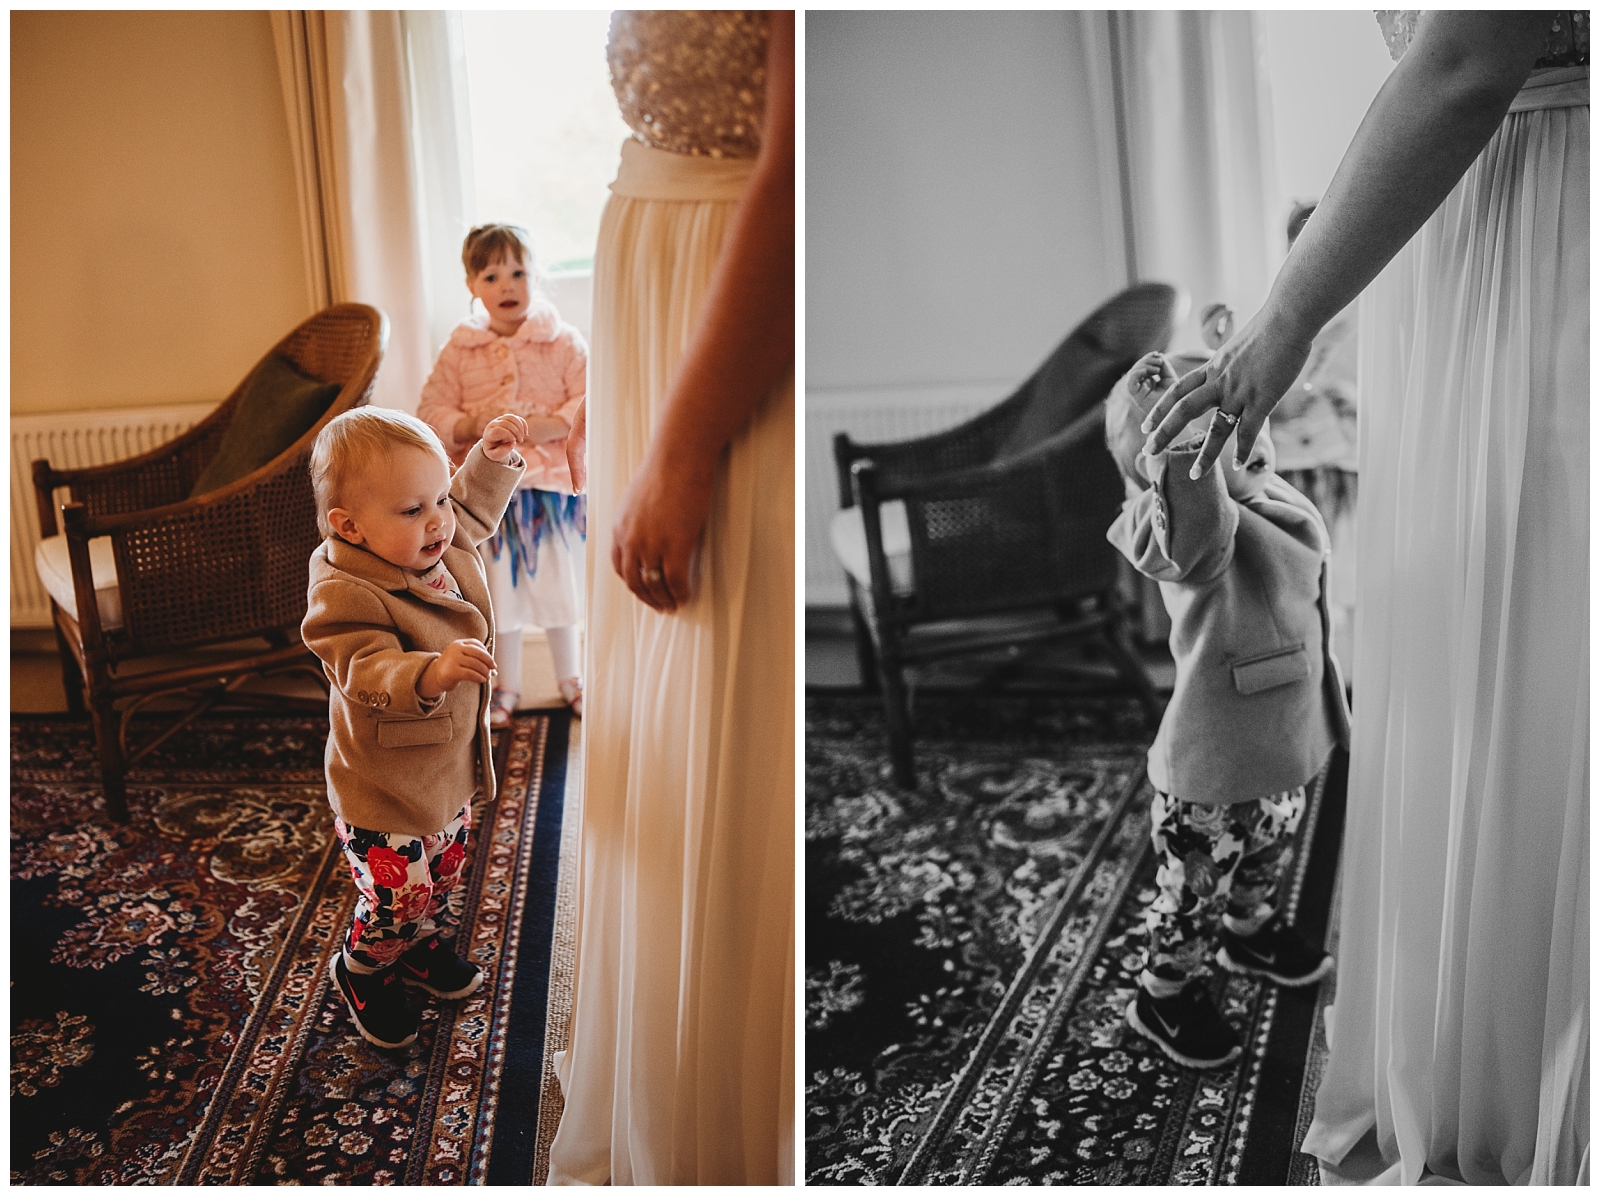 Toddler girl reaching up to Mother's outstretched hands as she finishes getting into wedding dress